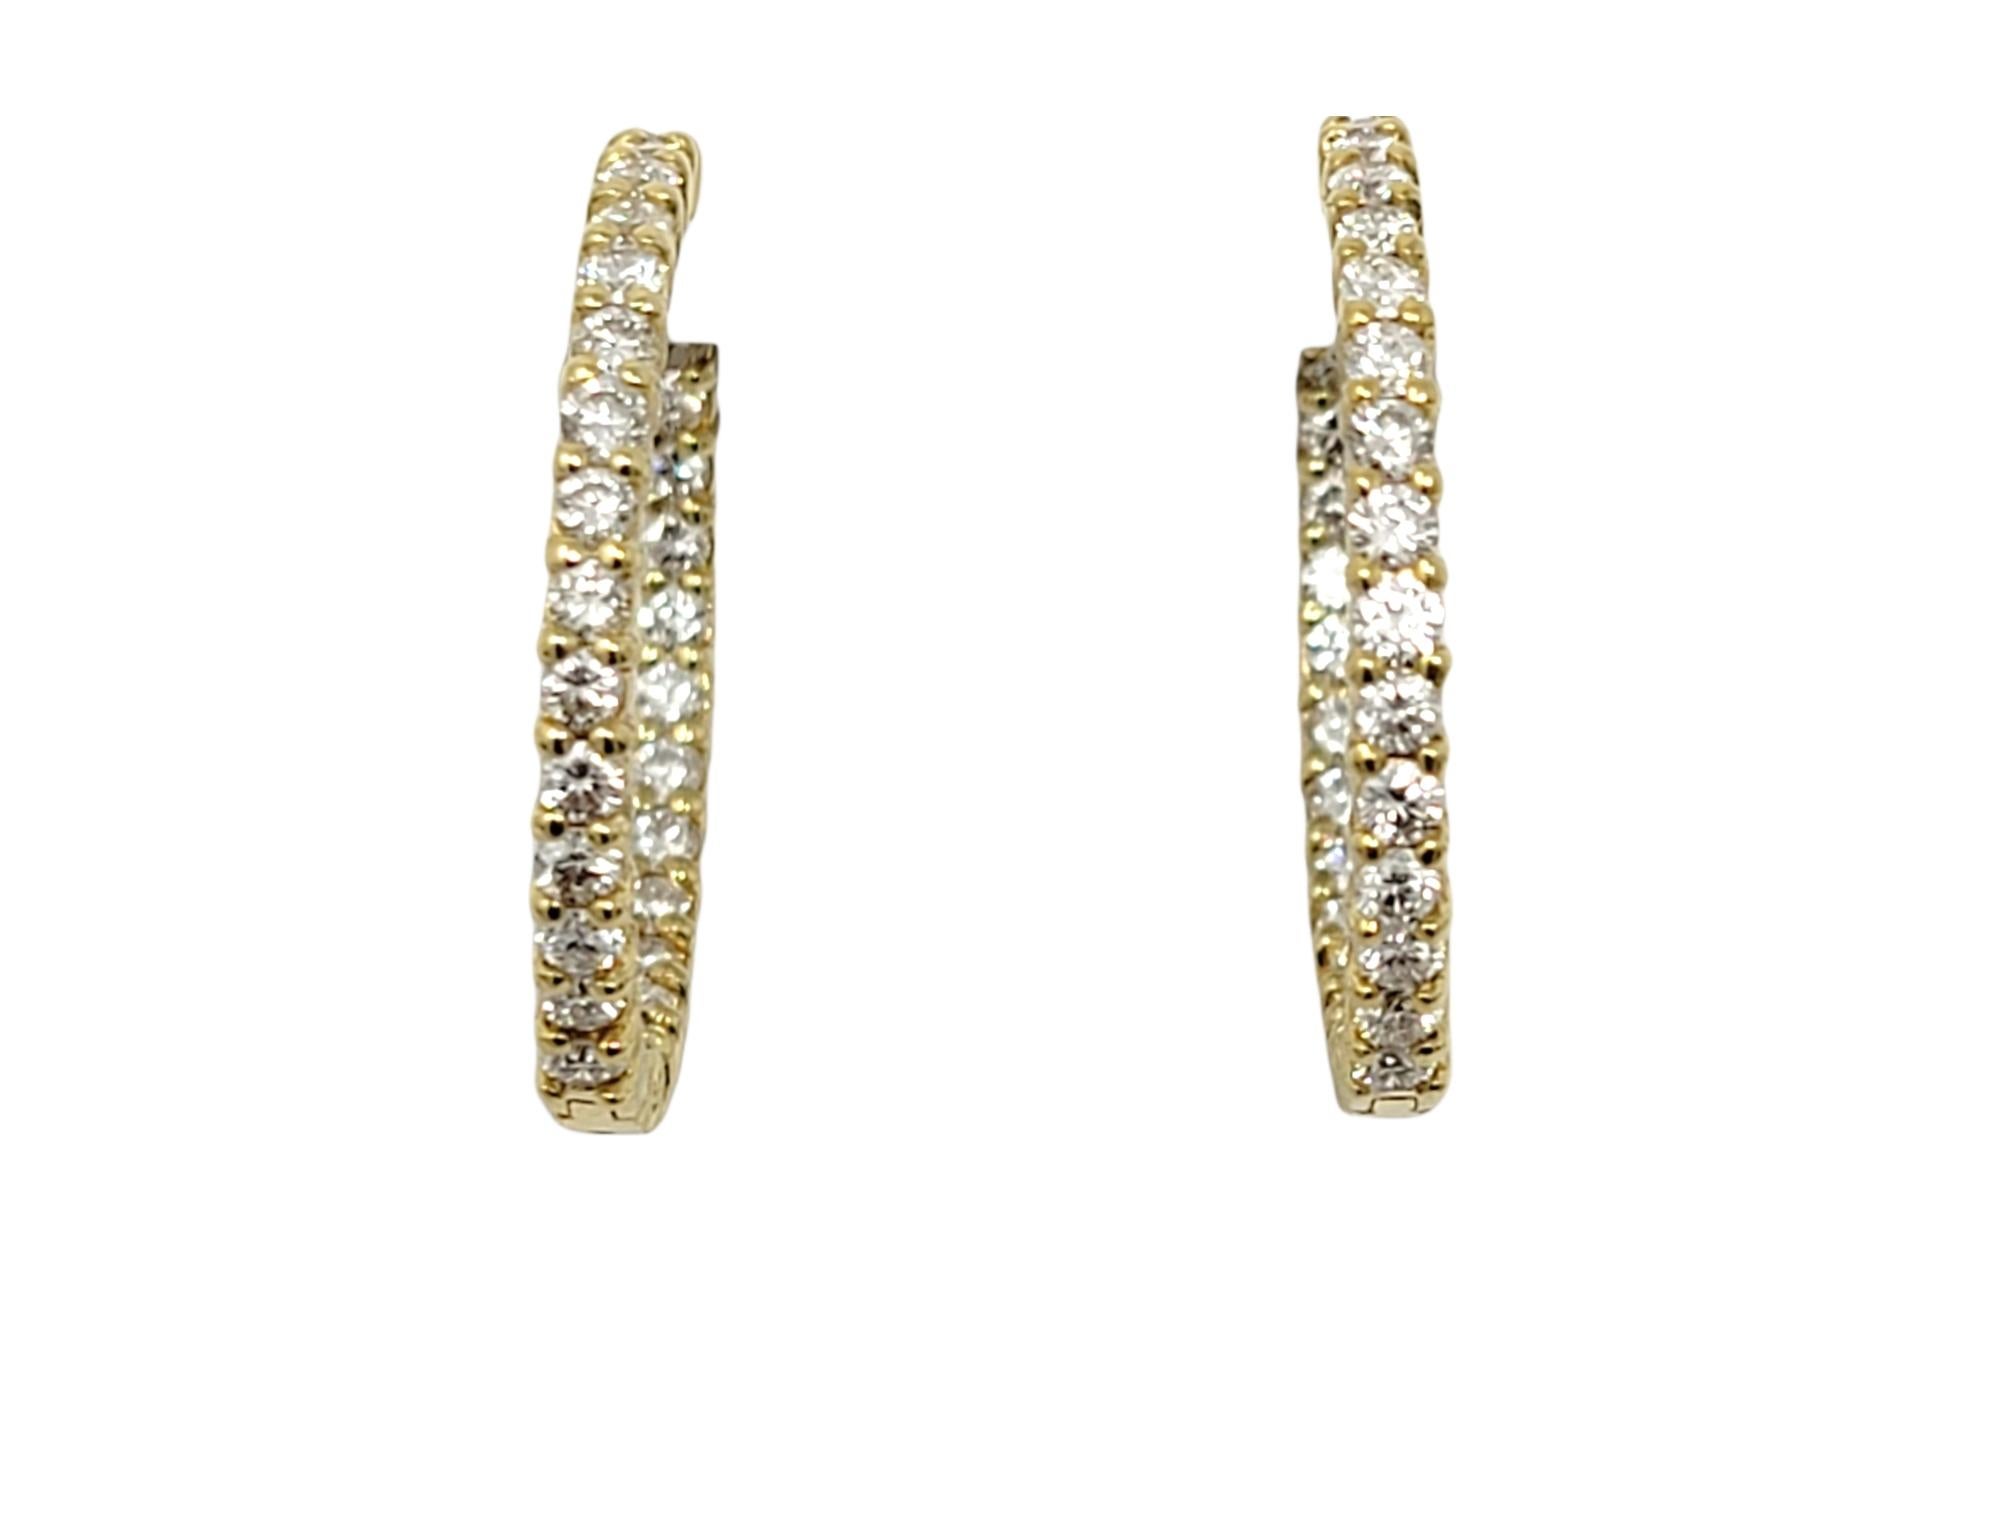 If you are looking for dazzling sparkle from every angle, these stunning diamond hoop earrings will not disappoint! Arranged in a unique inside/outside setting, the diamonds are positioned to catch the light from different angles, making your lobes